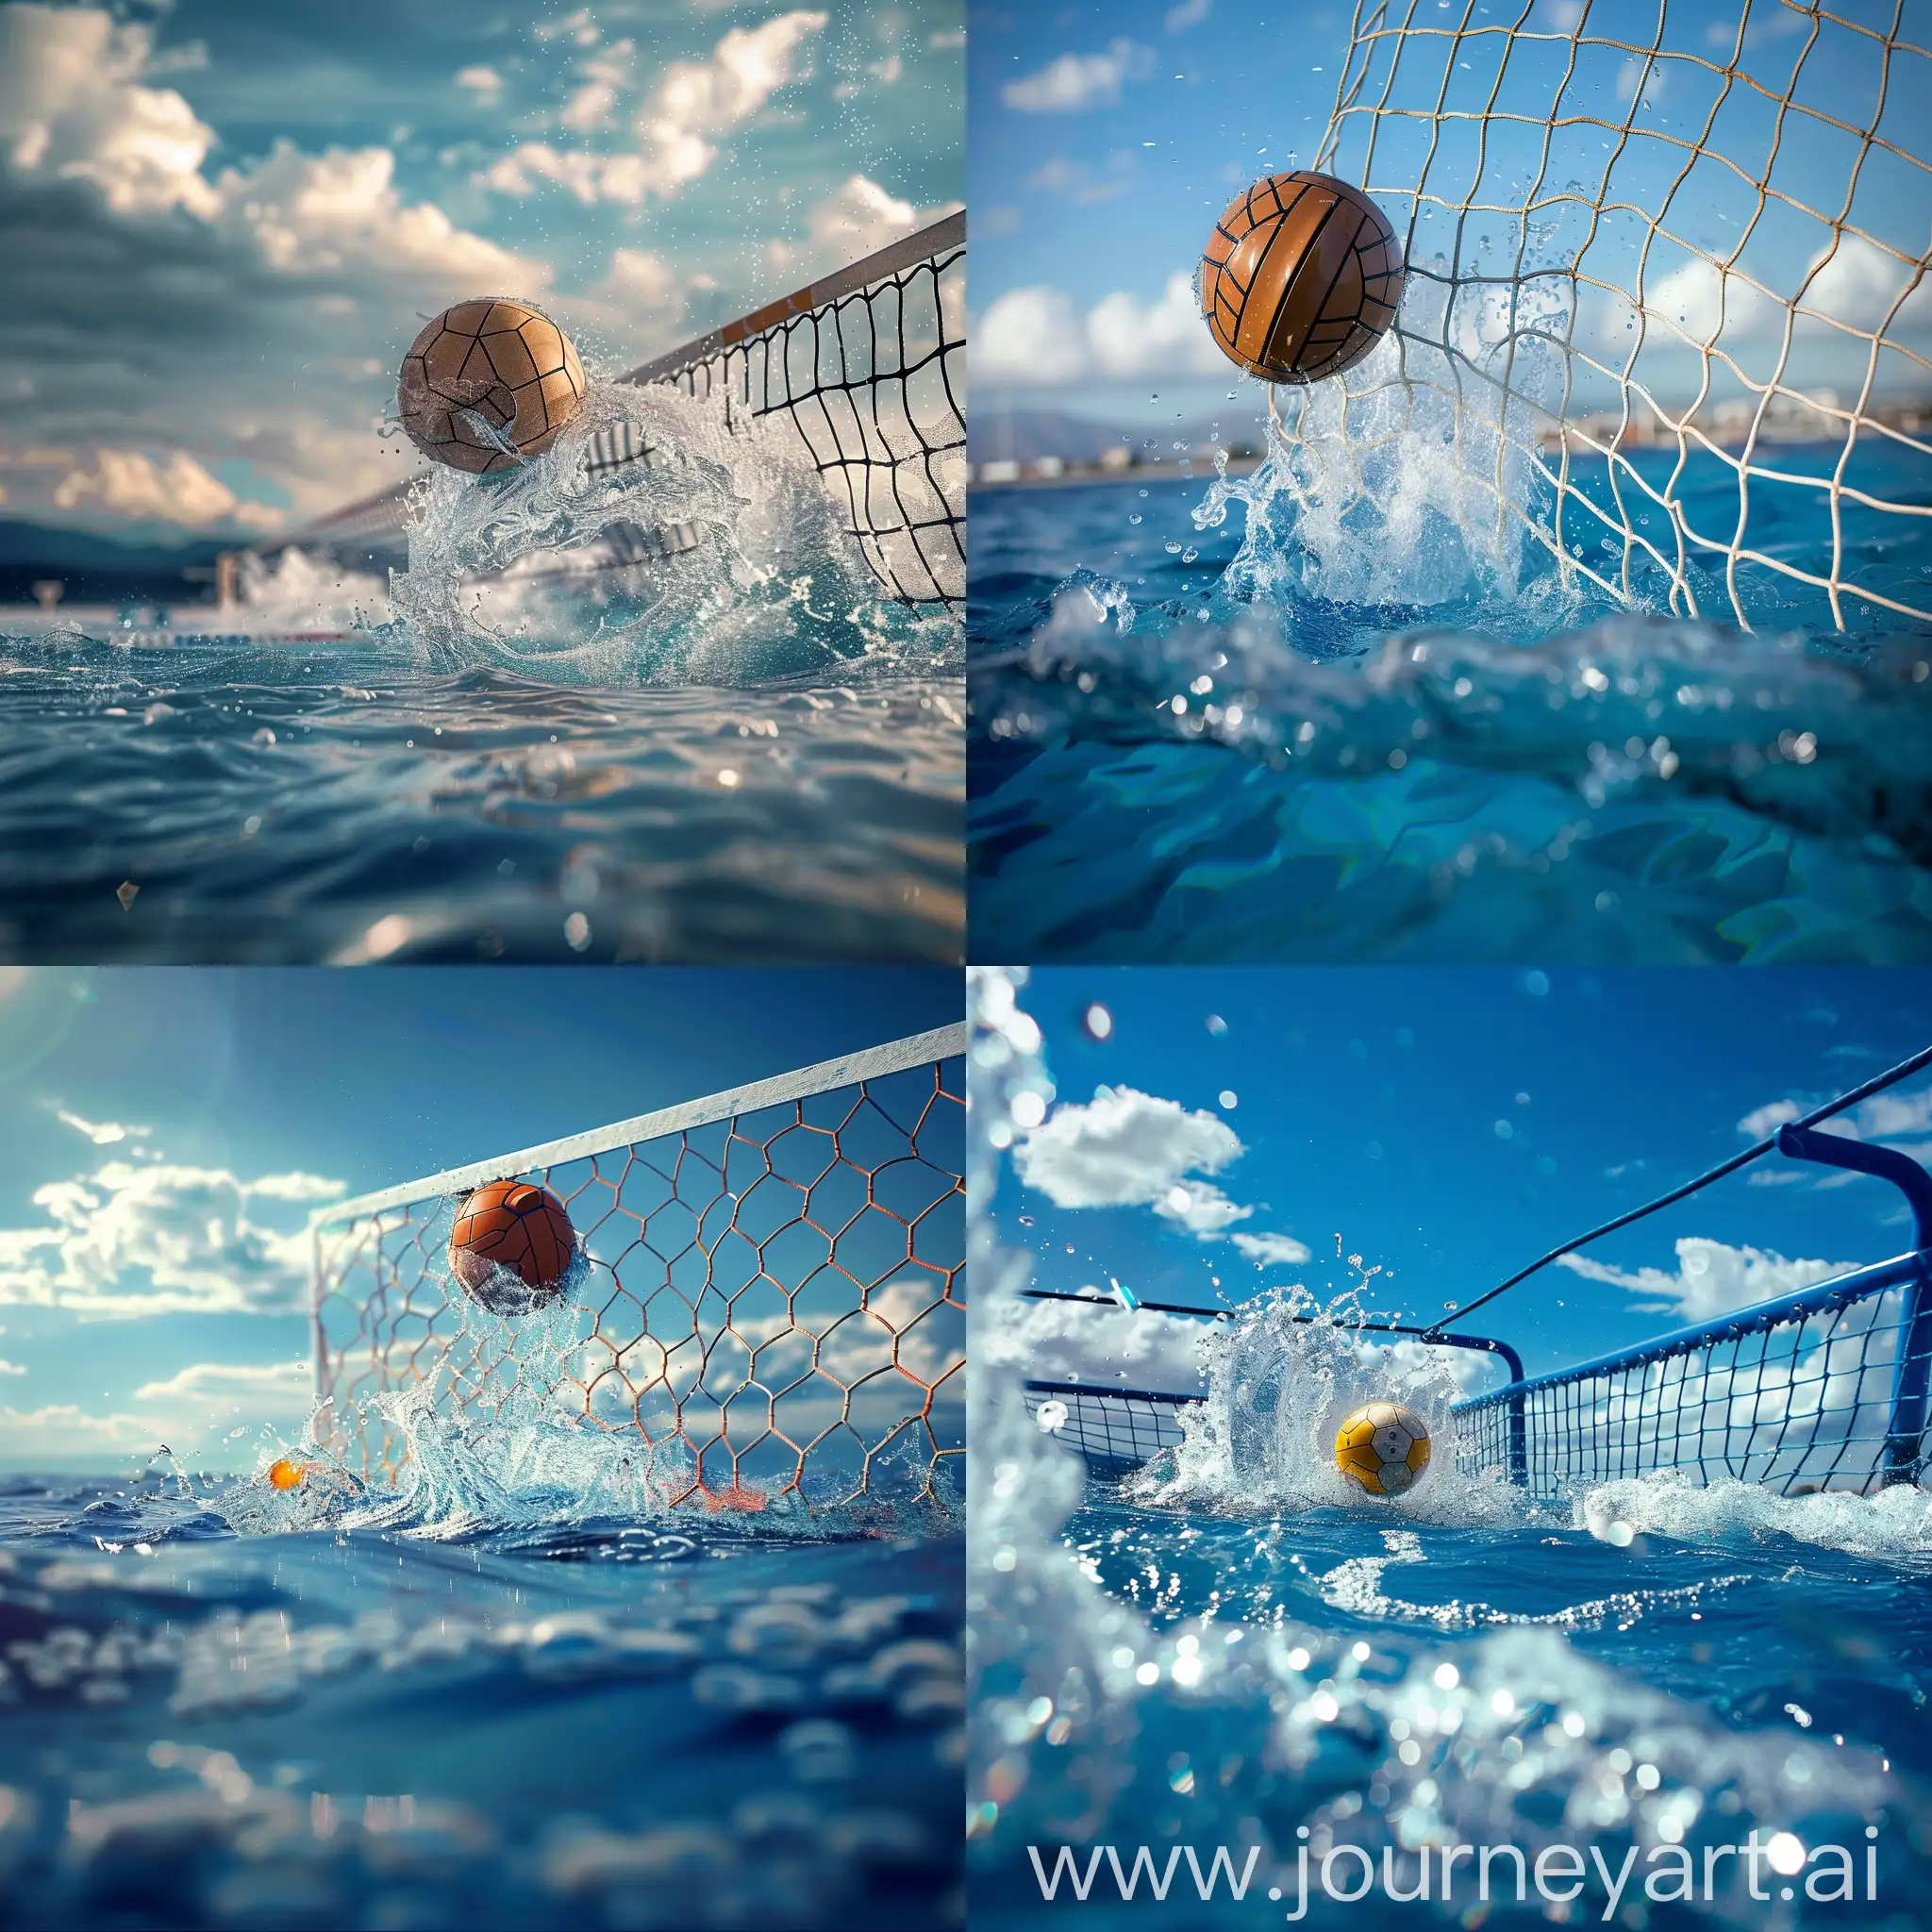 generic realistic image of a waterpolo ball entering the net